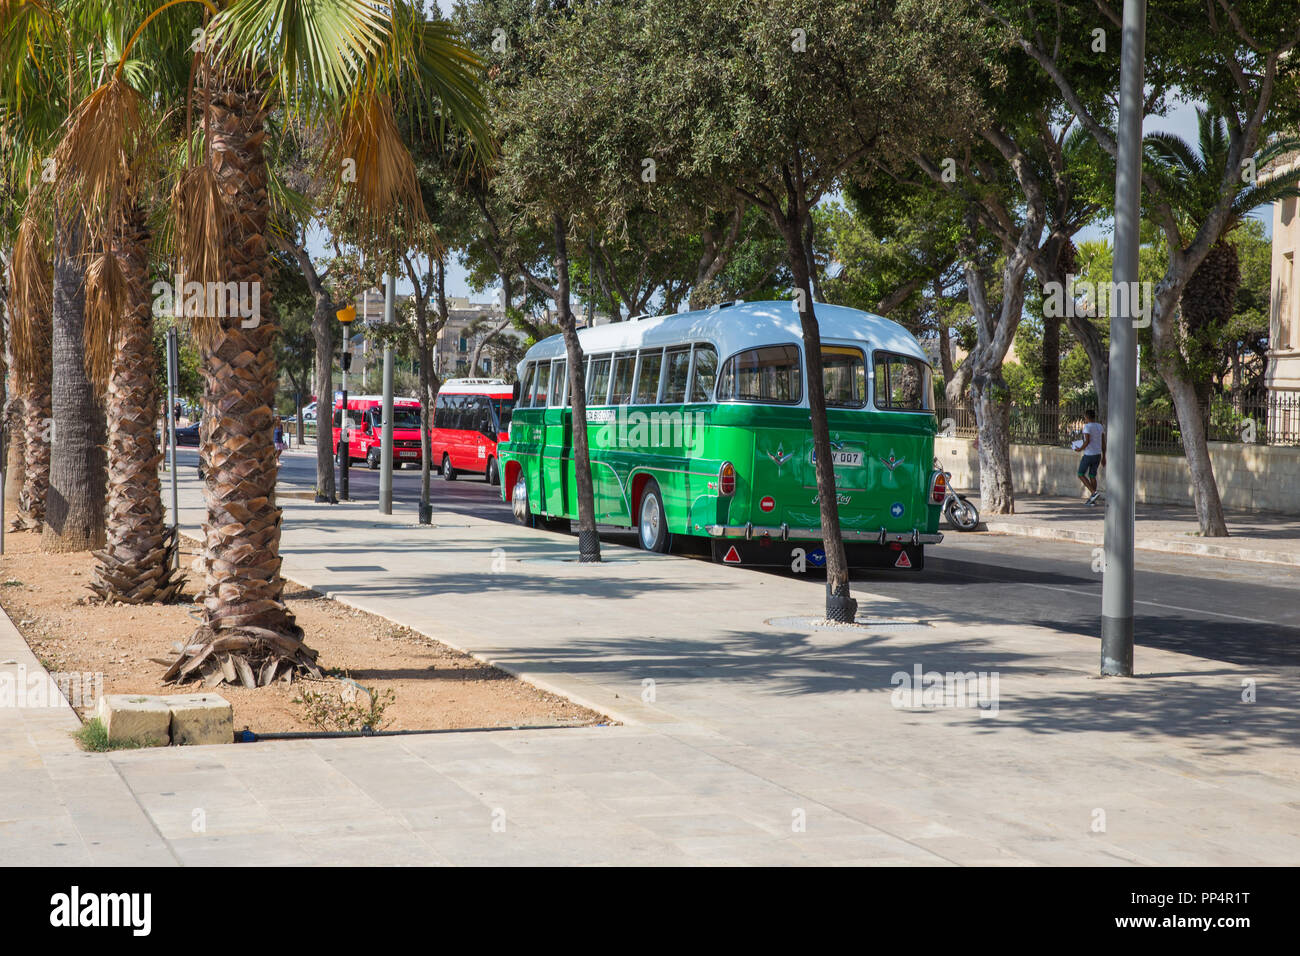 City Valleta, Malta, Europe. City streets and  urban view. Green bus, peoples and architecture. Travel photo 2018 september. Stock Photo